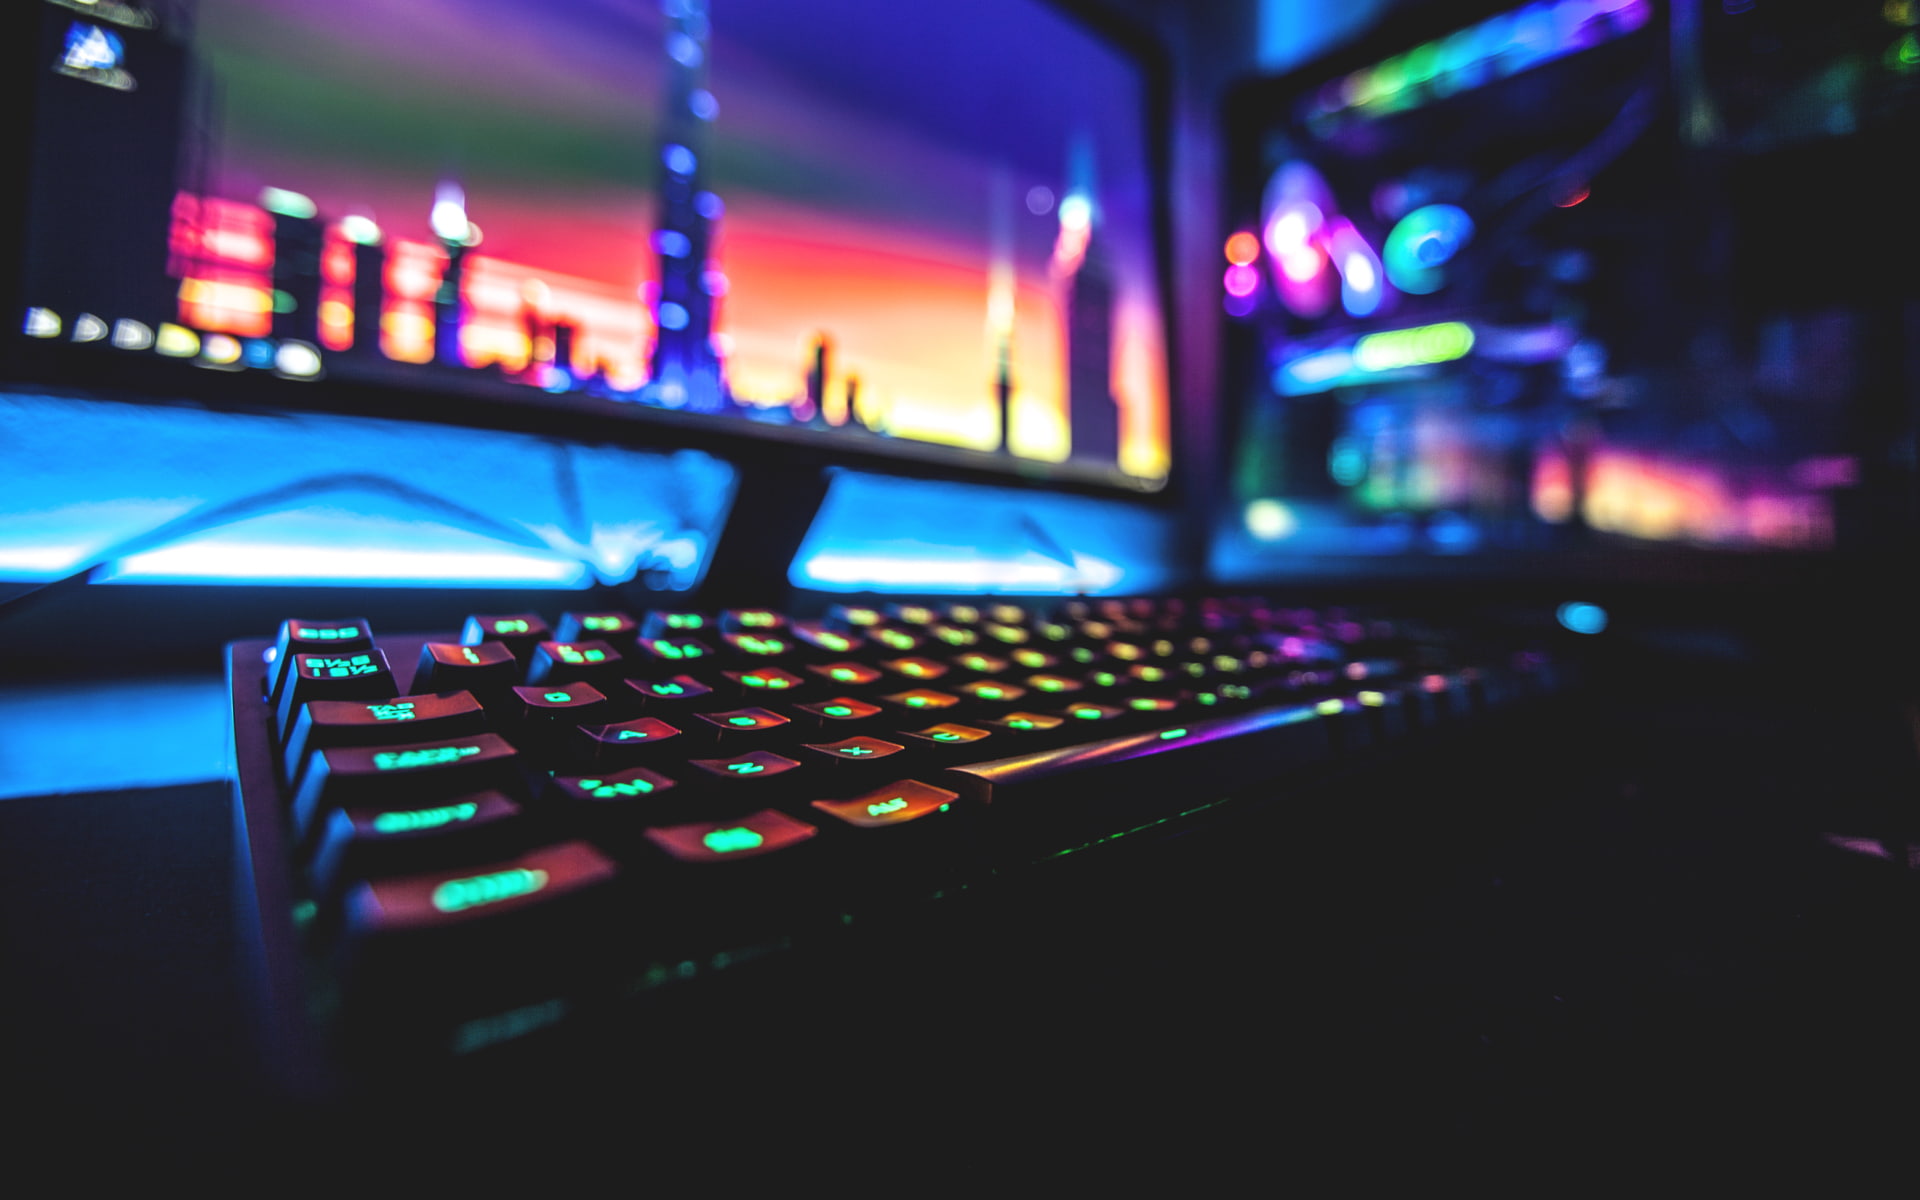 neon, keyboards, computer, PC gaming, colorful